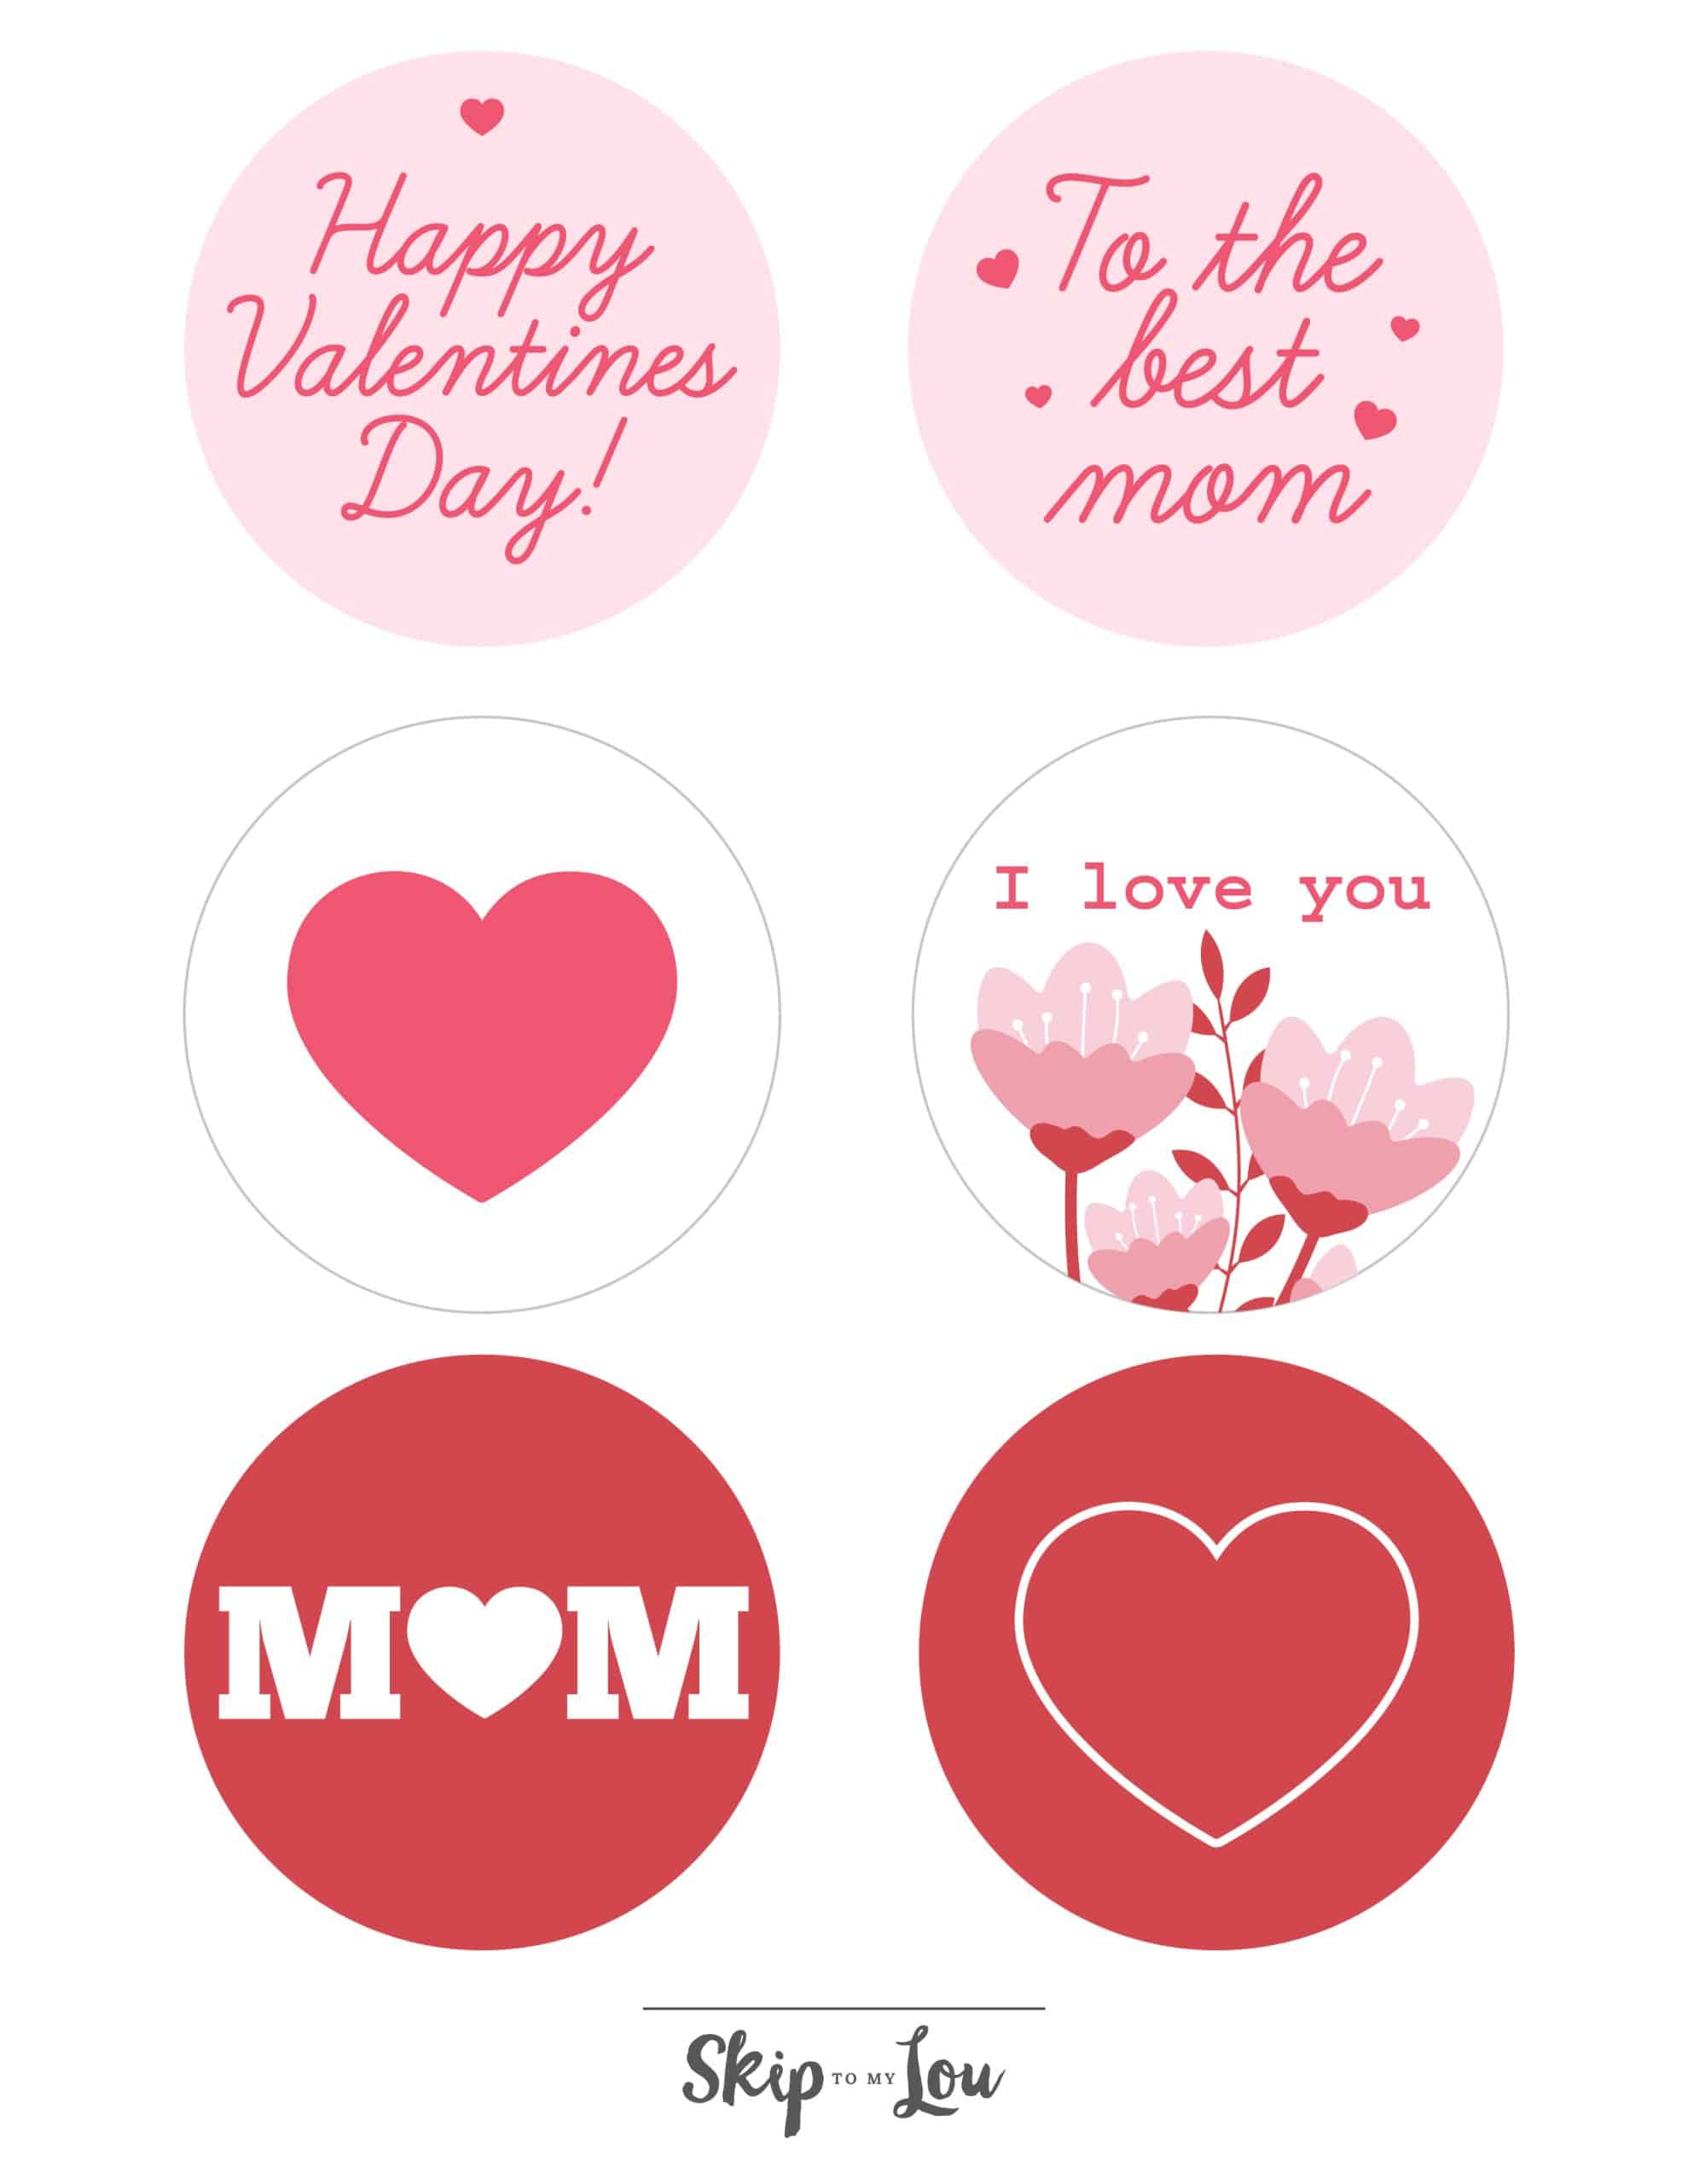 Happy valentine's day mom stickers to print and put on presents, cards, etc, with cute designs like flowers and hearts. fr